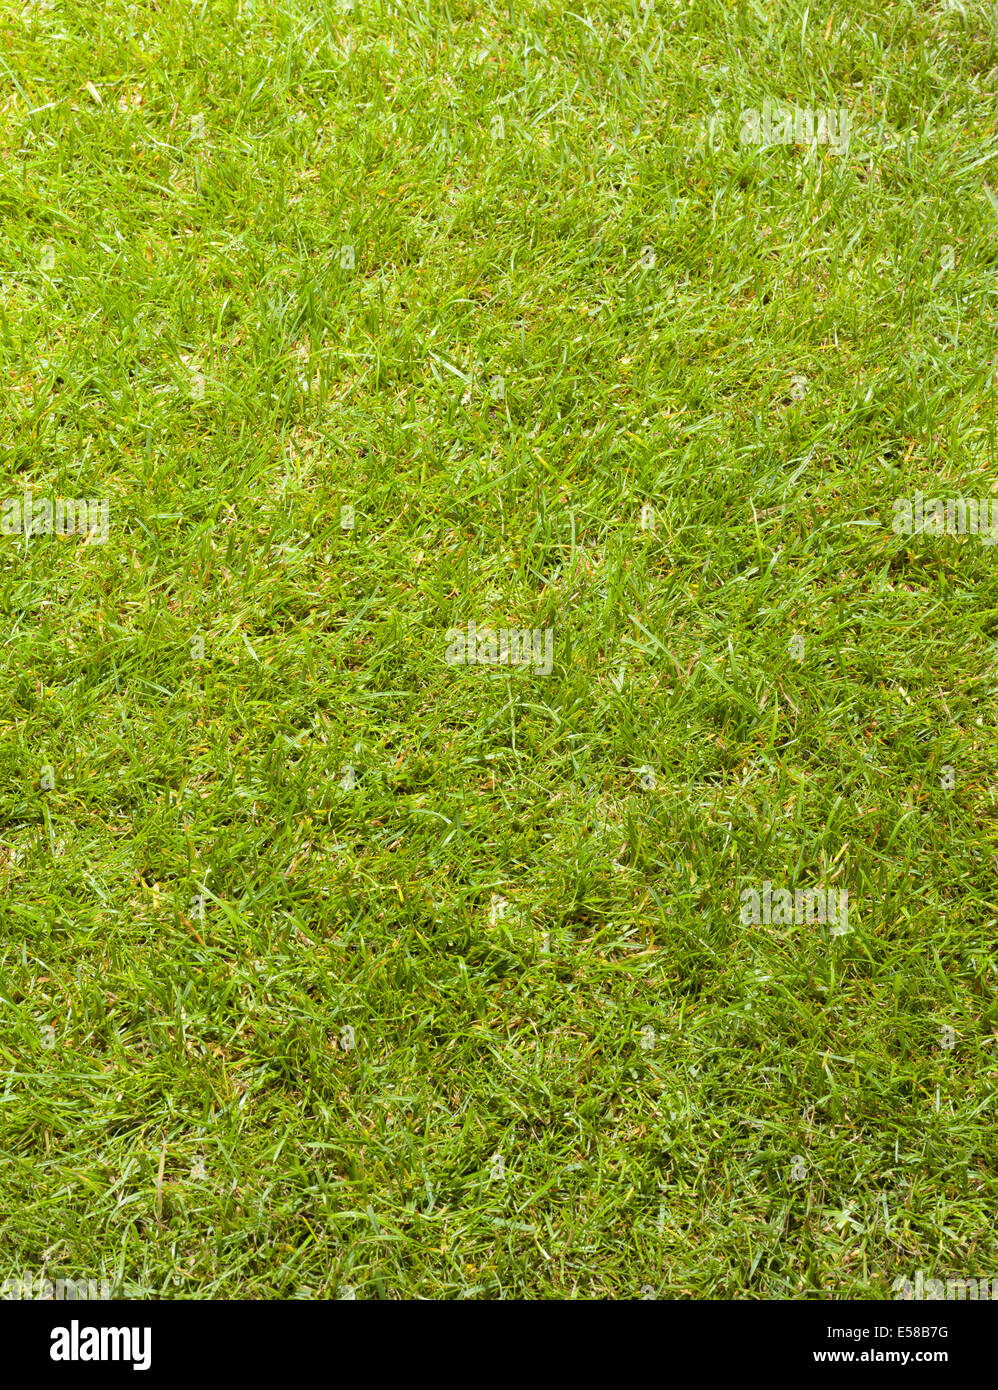 A simple grass background Stock Photo